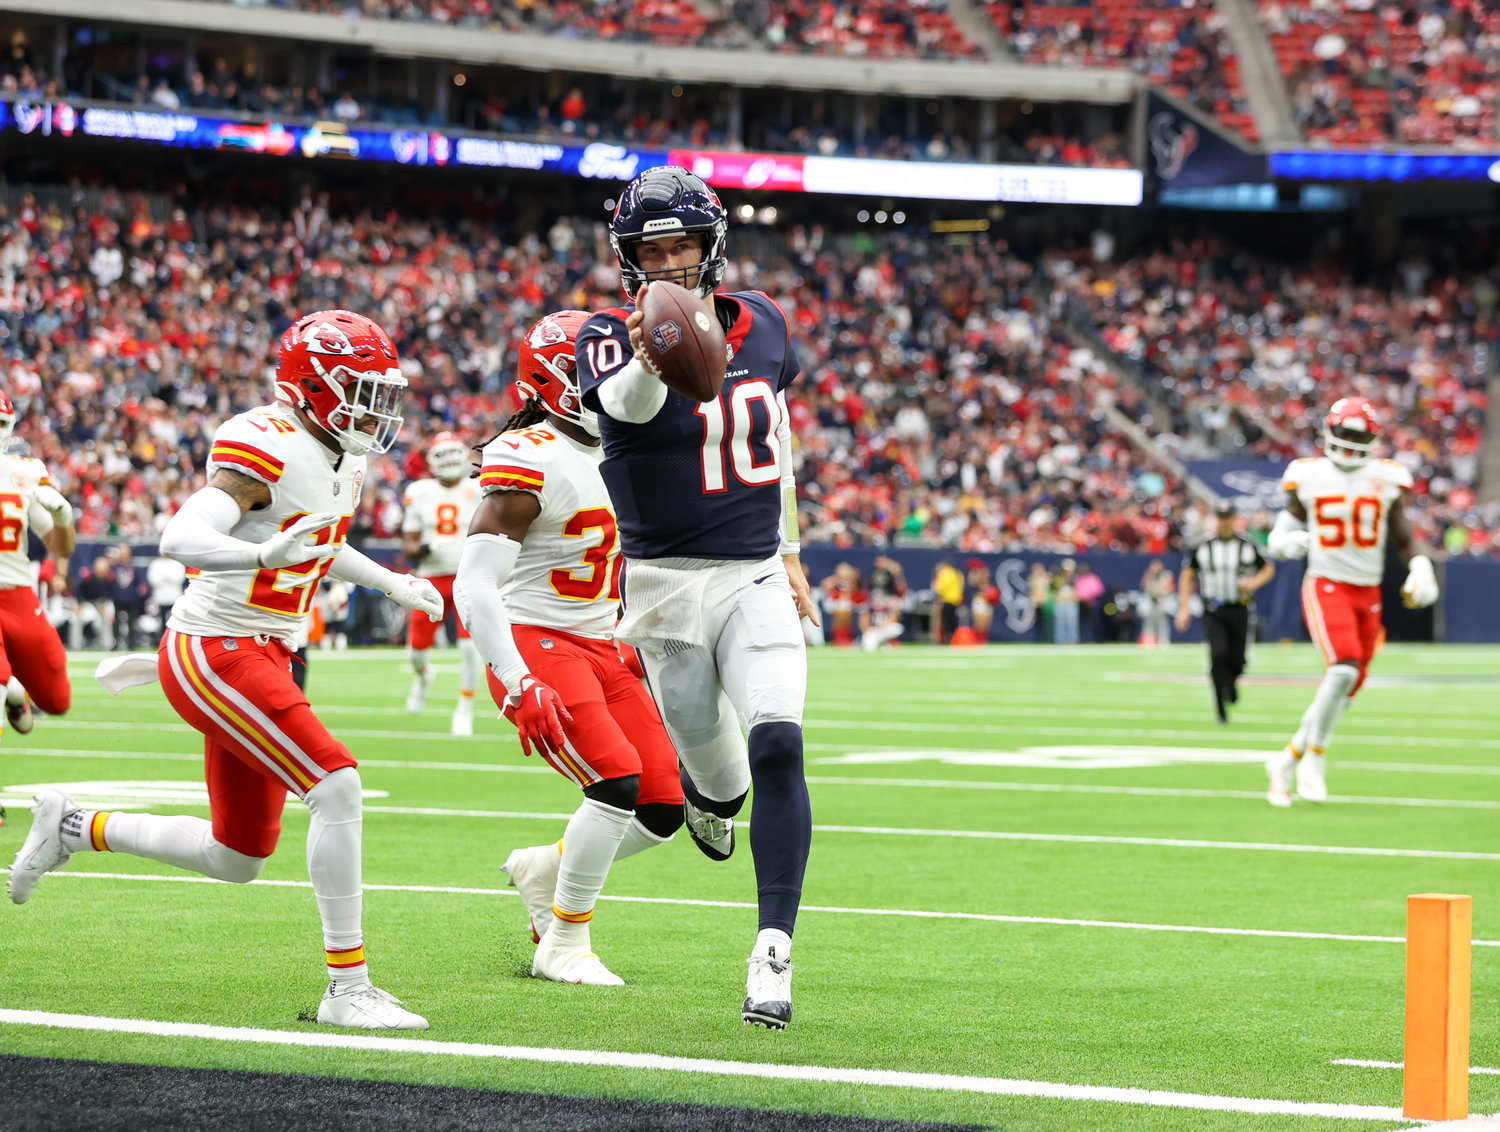 Houston Texans quarterback Davis Mills (10) scores on a a 17-yard touchdown carry during an NFL game between the Texans and the Chiefs on Dec. 18, 2022, in Houston. The Chiefs won, 30-24, in overtime.